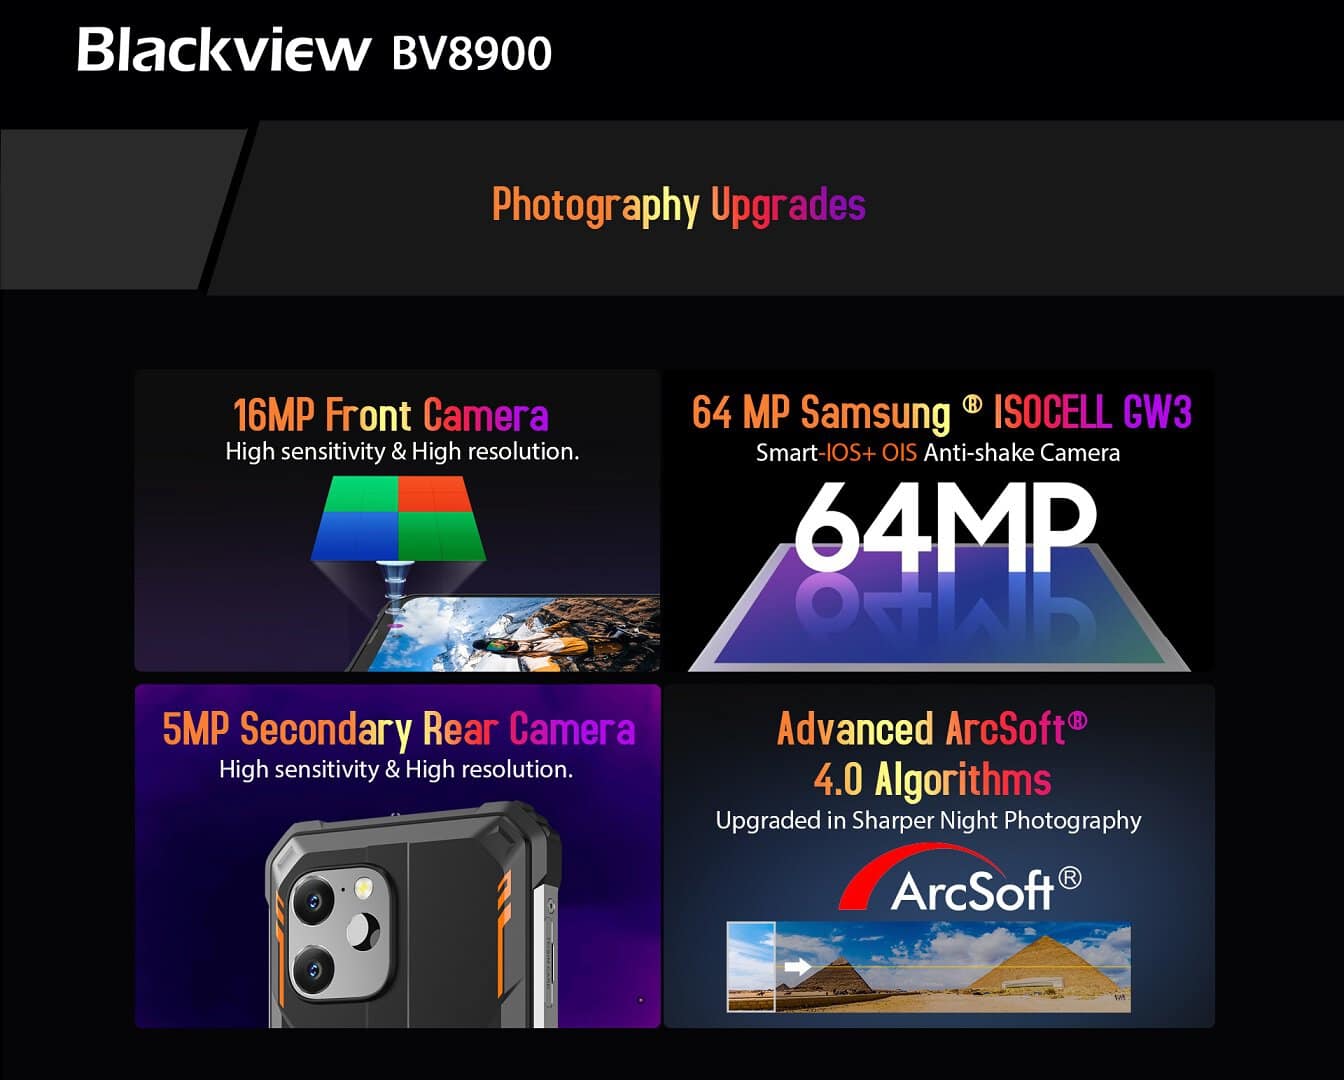 Blackview BV8900 Photography Upgrades